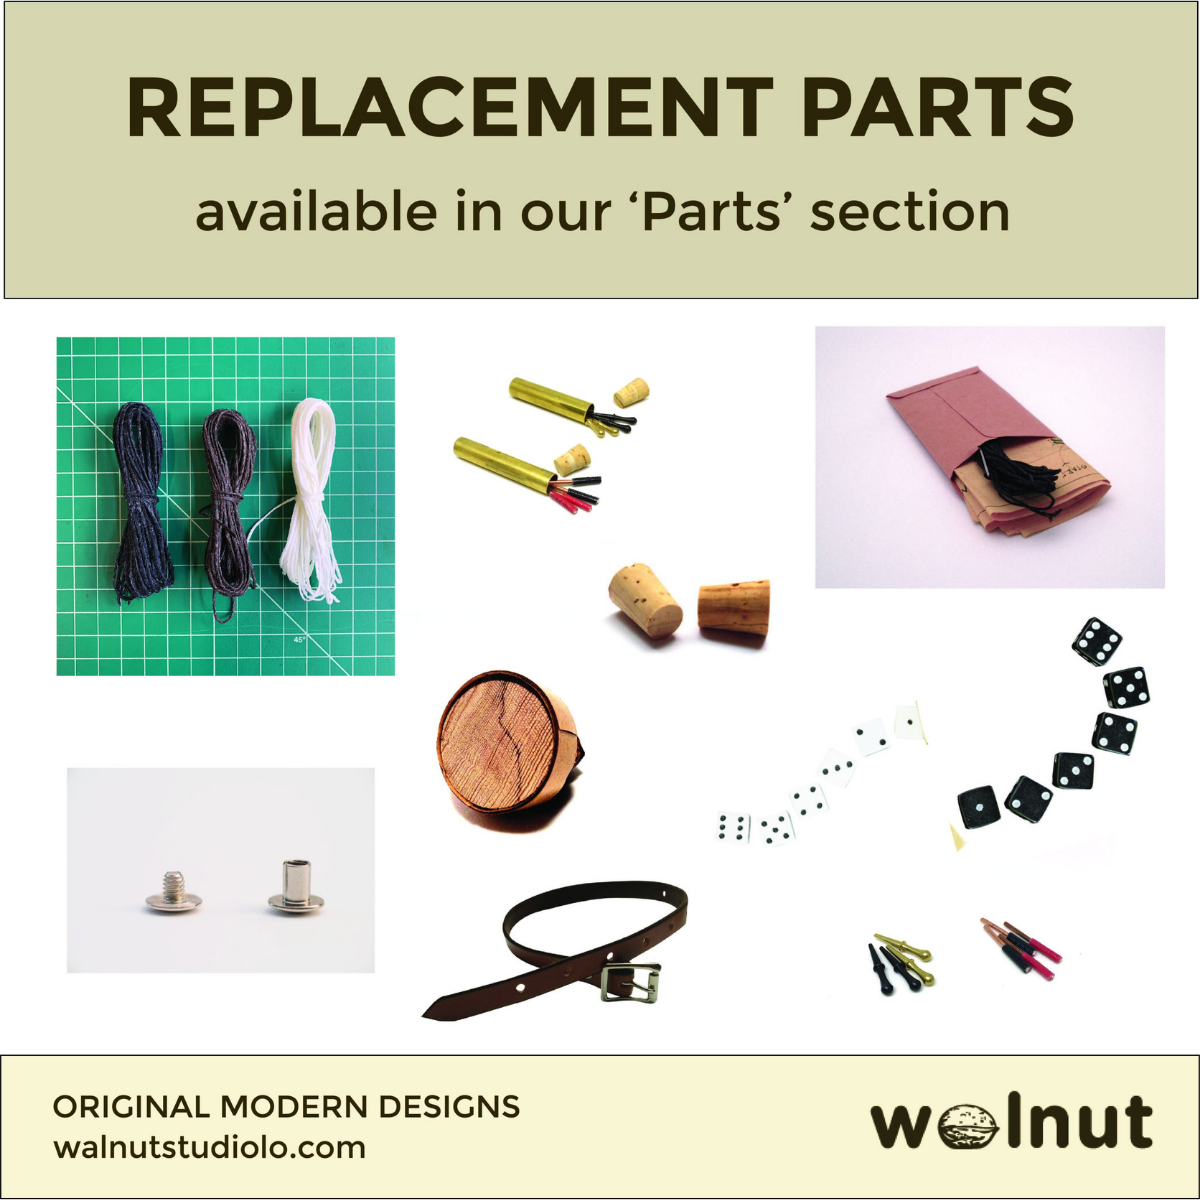 Title: &quot;Replacement Parts available in our Parts section&quot;. Photo collage shows various replacement parts for Walnut Studiolo&#39;s original designs, including replacement travel-sized dice. 